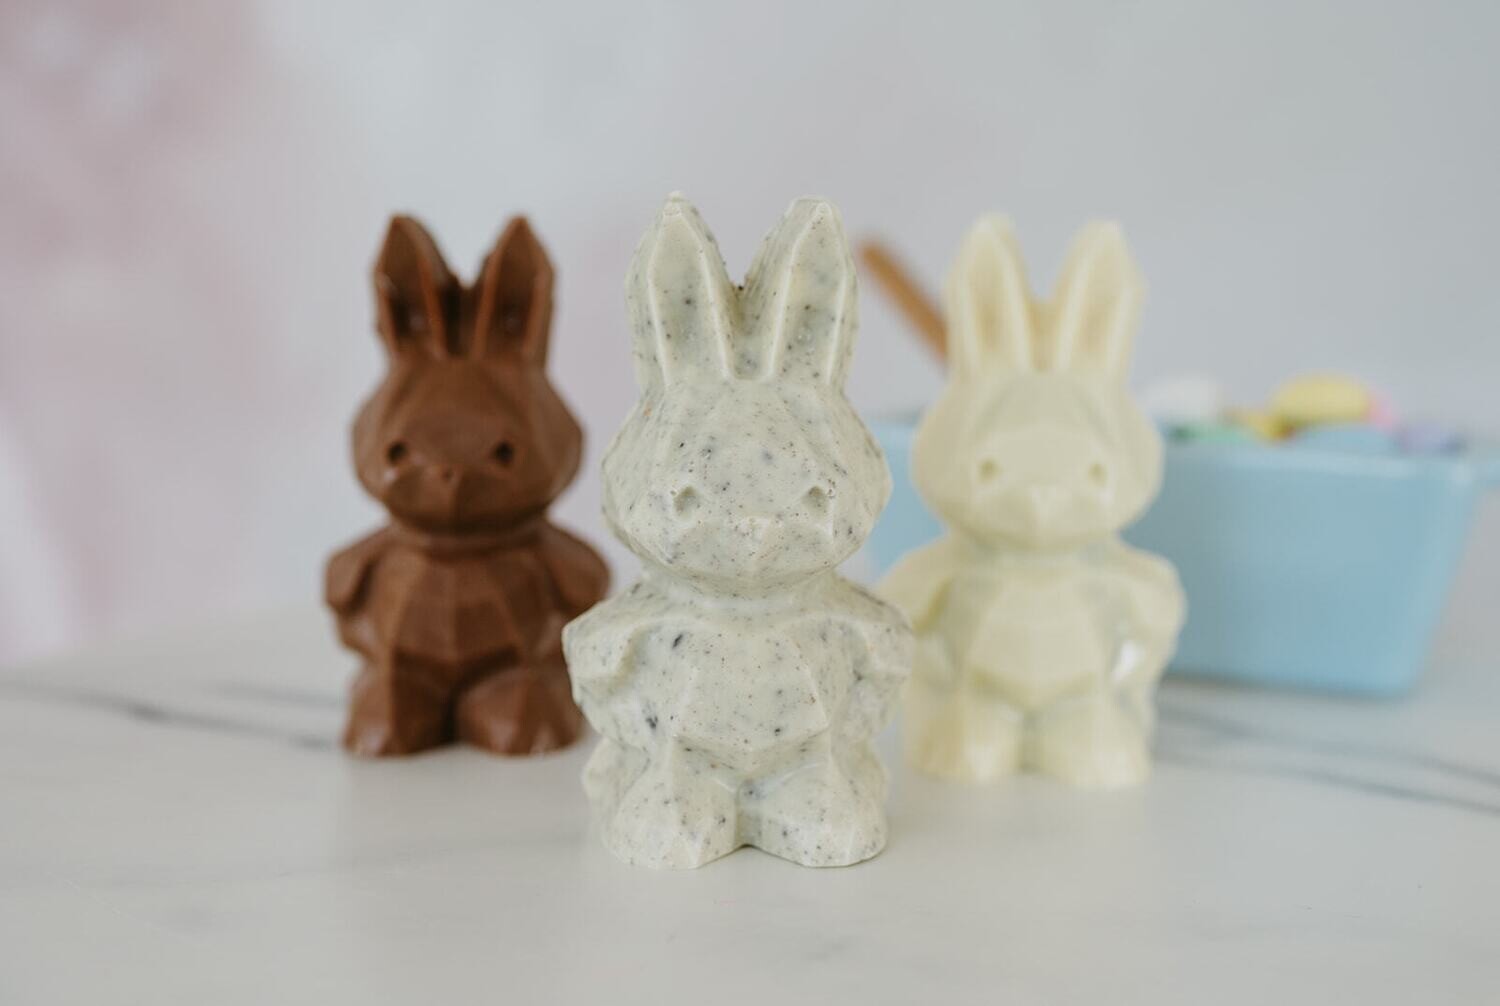 Two 3D Chocolate Bunnies